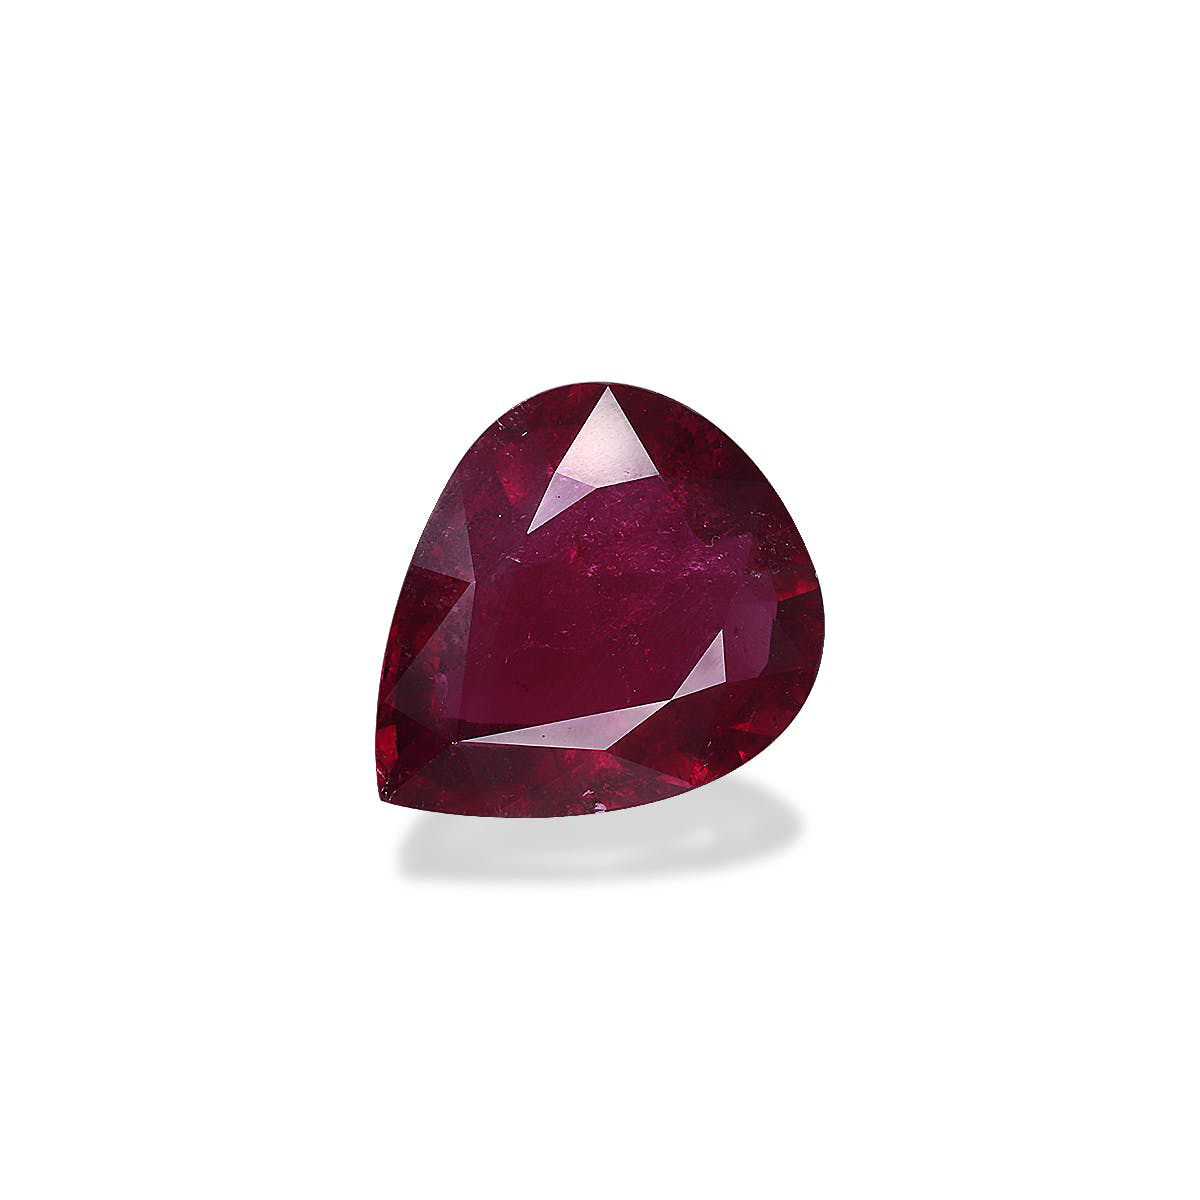 Picture of Scarlet Red Rubellite Tourmaline 17.24ct (RL0248)